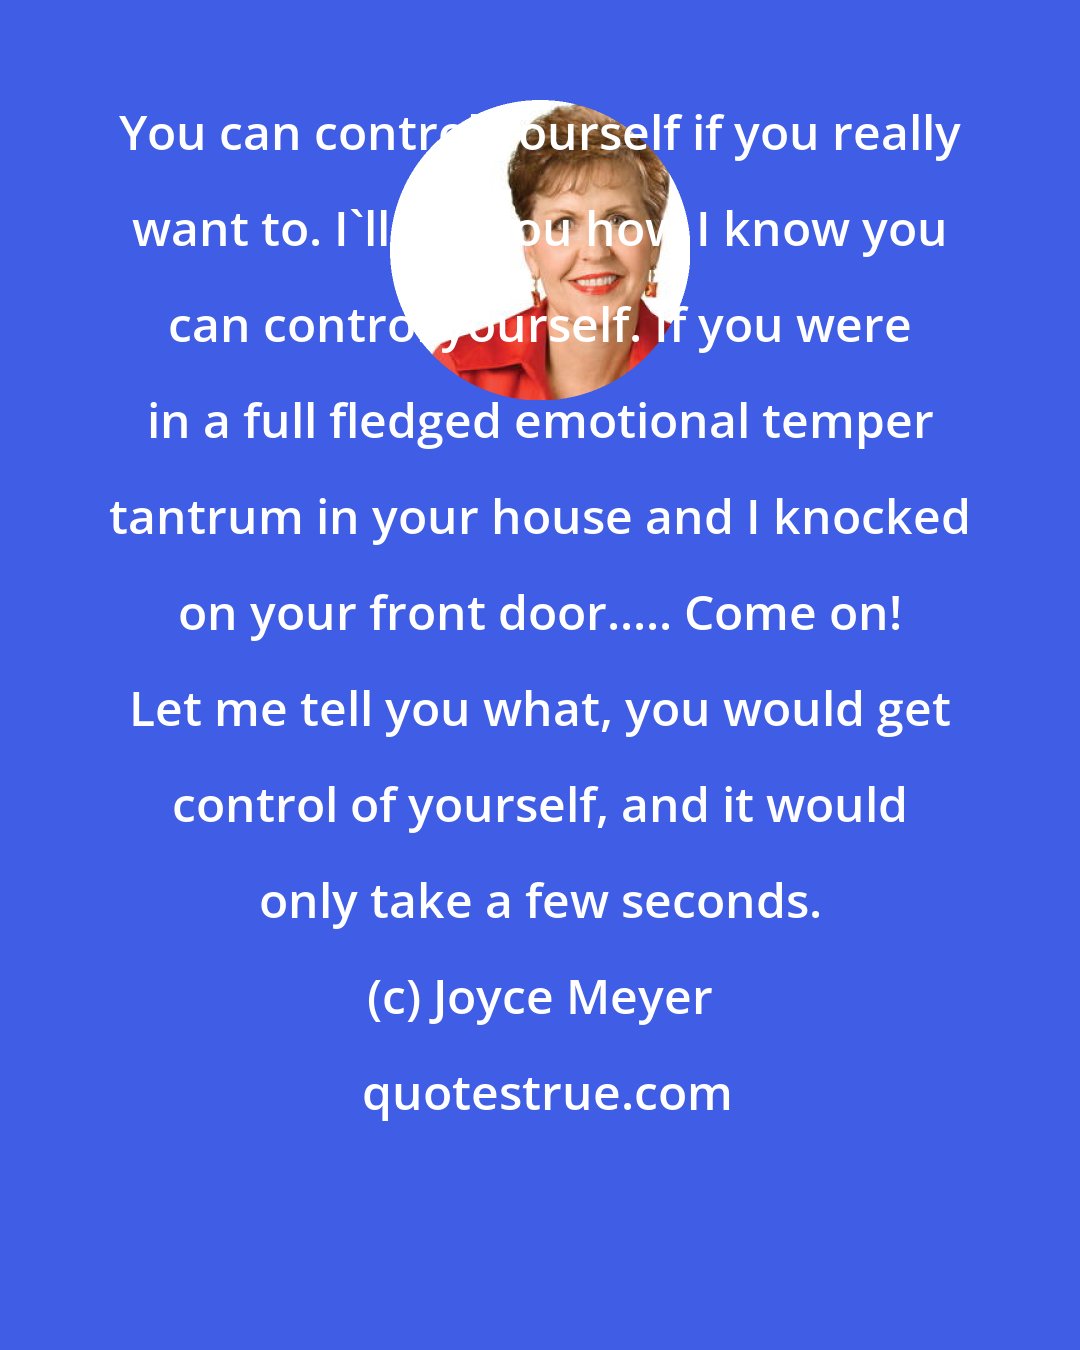 Joyce Meyer: You can control yourself if you really want to. I'll tell you how I know you can control yourself. If you were in a full fledged emotional temper tantrum in your house and I knocked on your front door..... Come on! Let me tell you what, you would get control of yourself, and it would only take a few seconds.